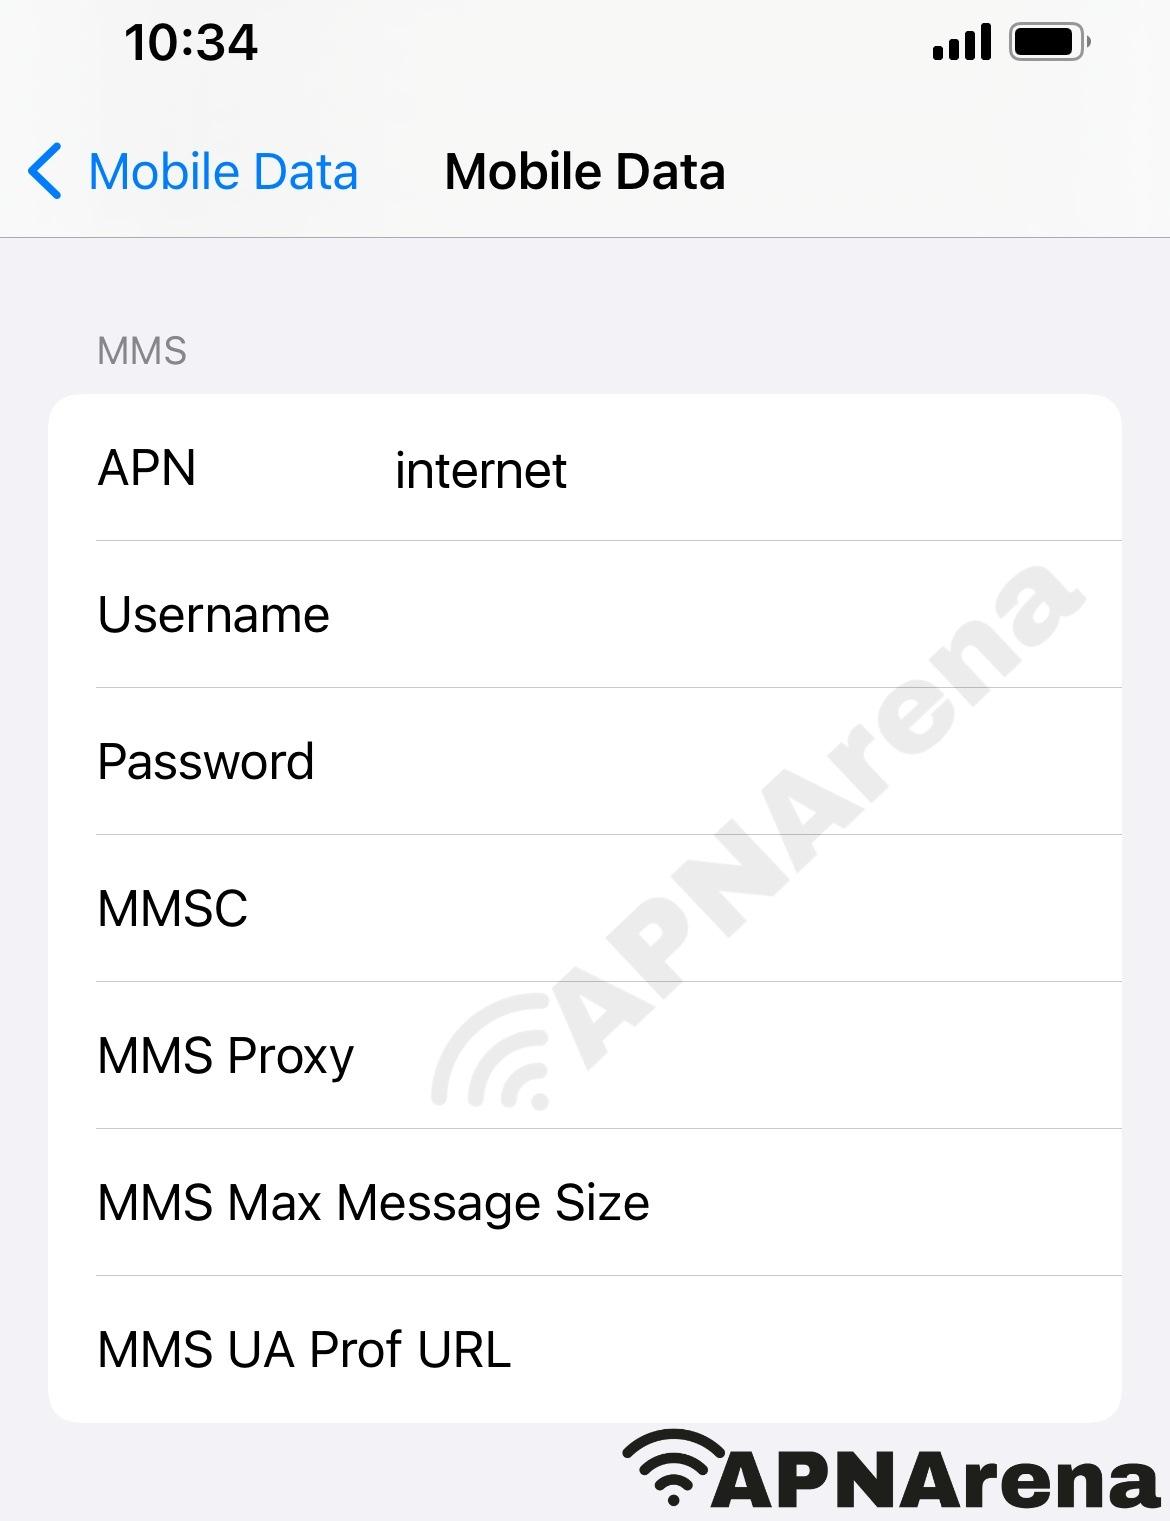 NOS (Optimus) MMS Settings for iPhone